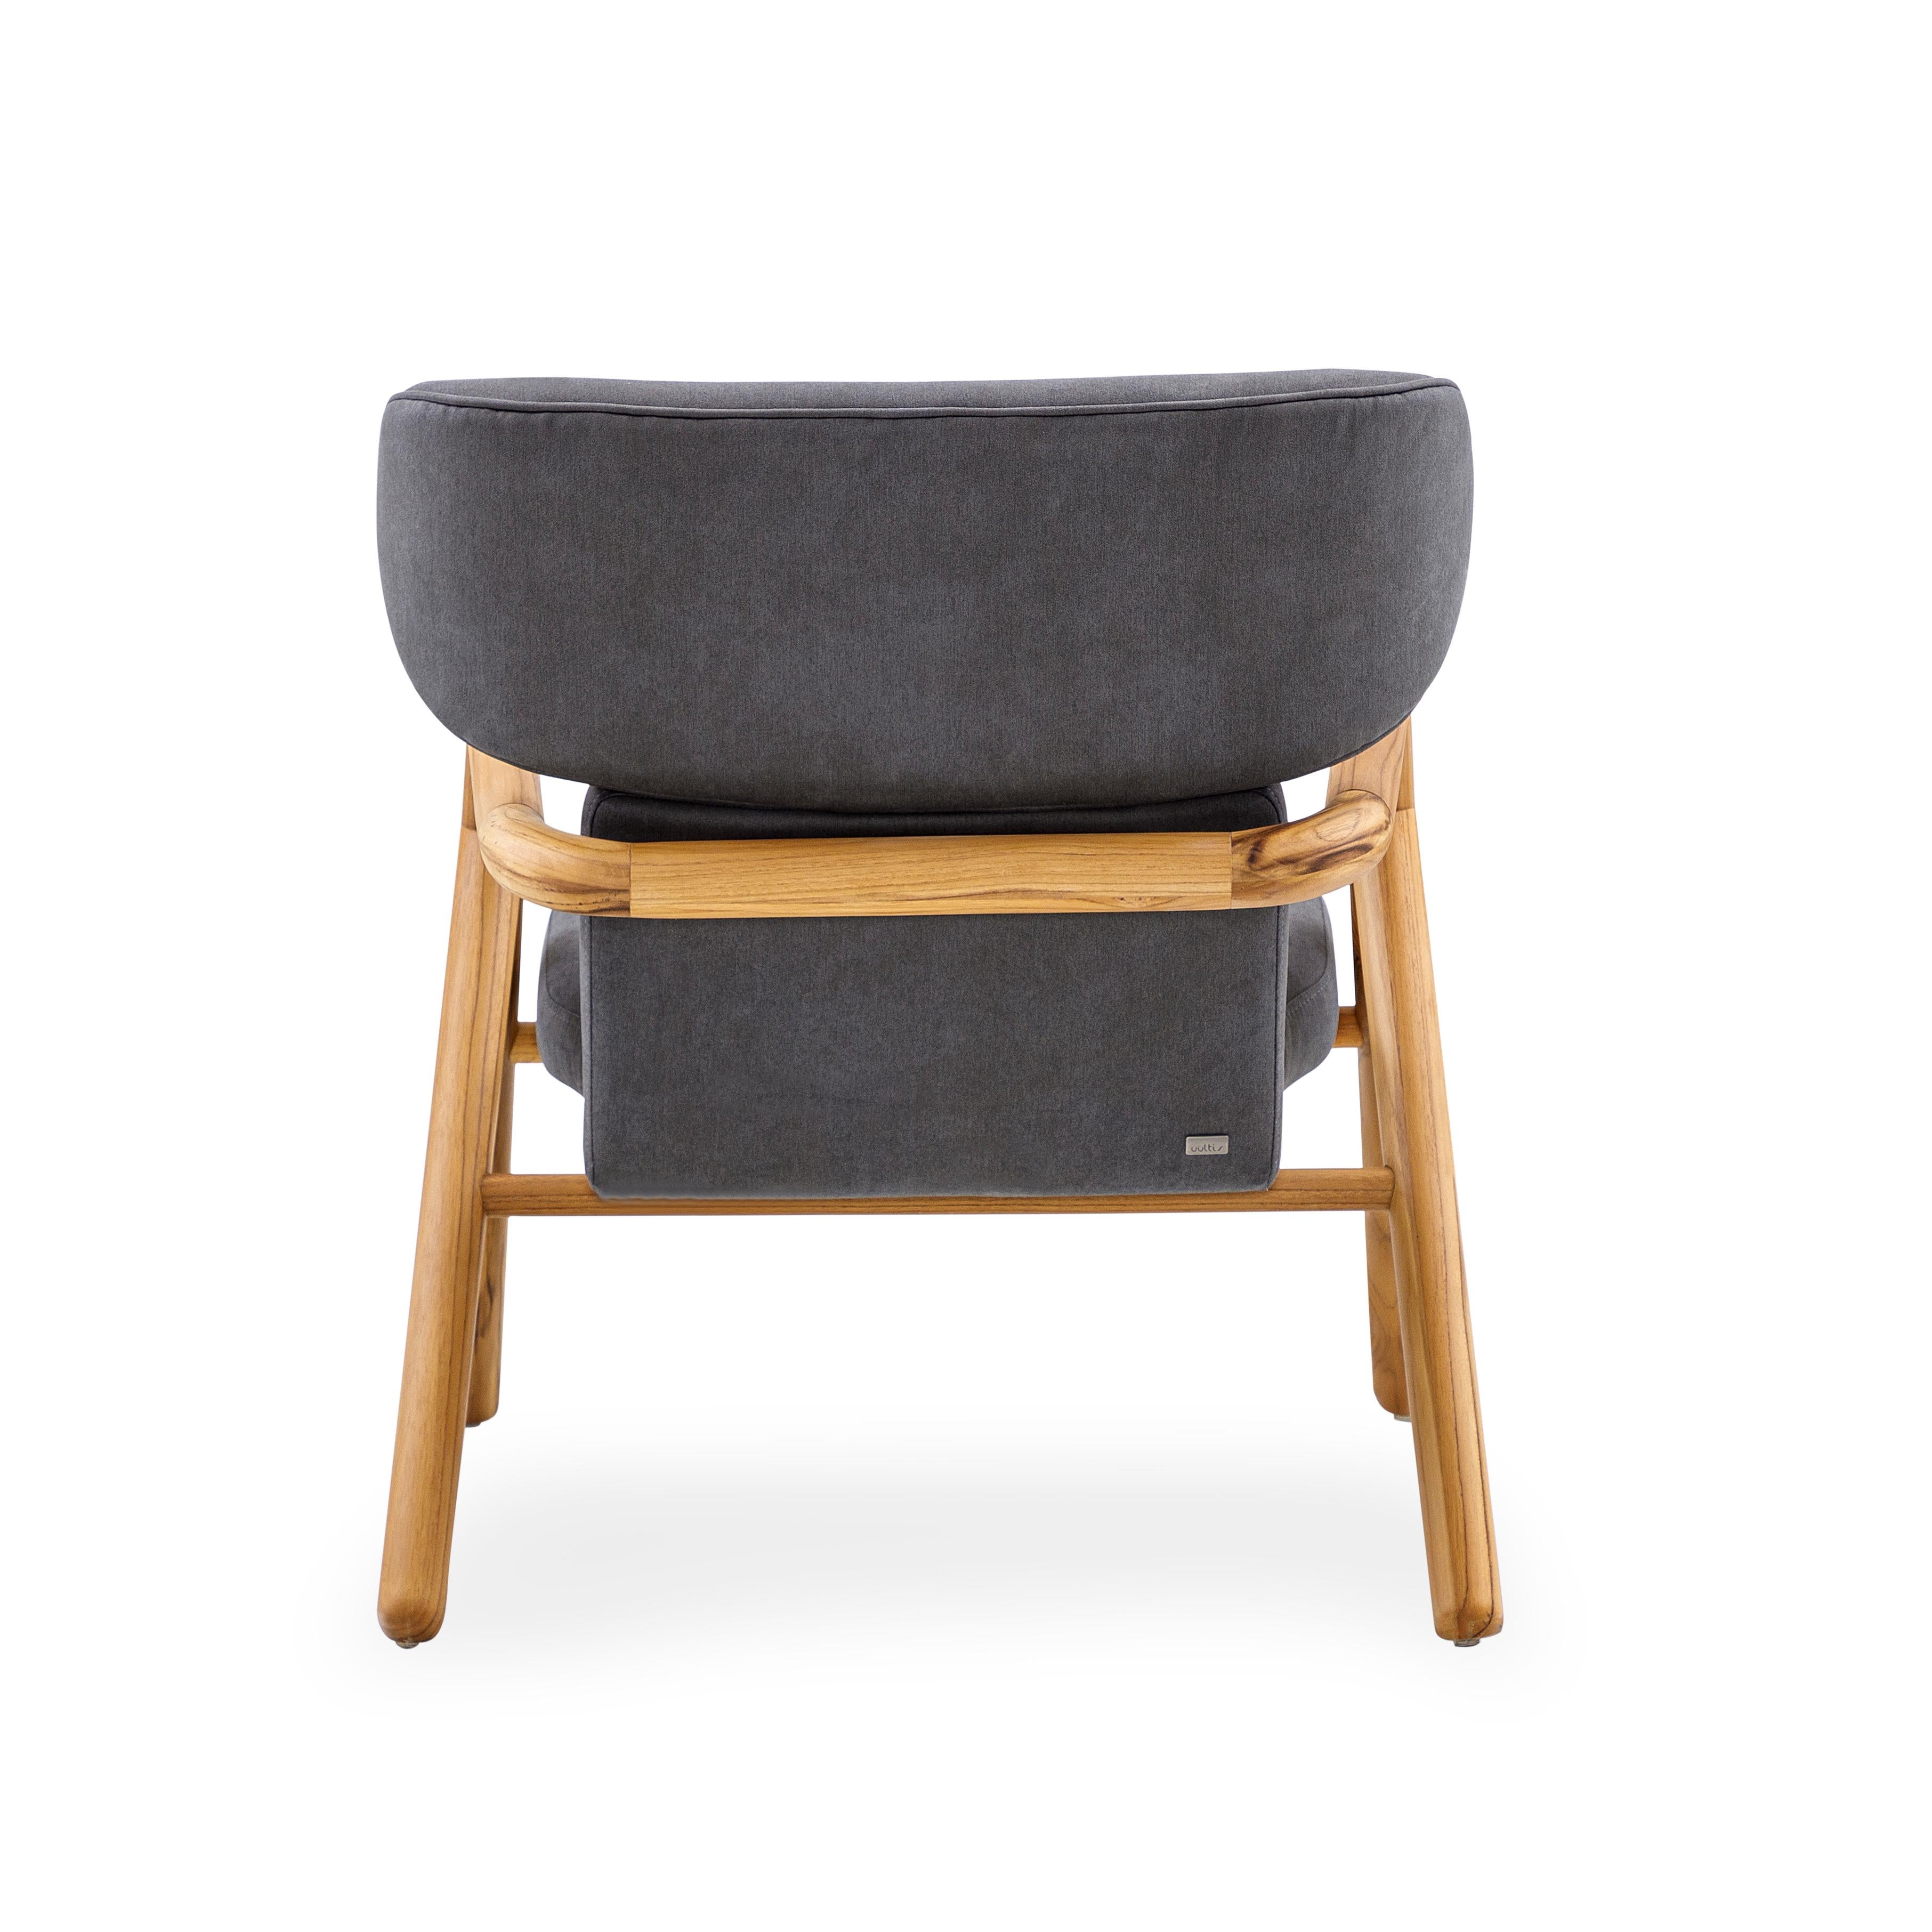 Brazilian Sole Scandinavian-Styled Armchair in Teak Wood Finish and Charcoal Fabric For Sale